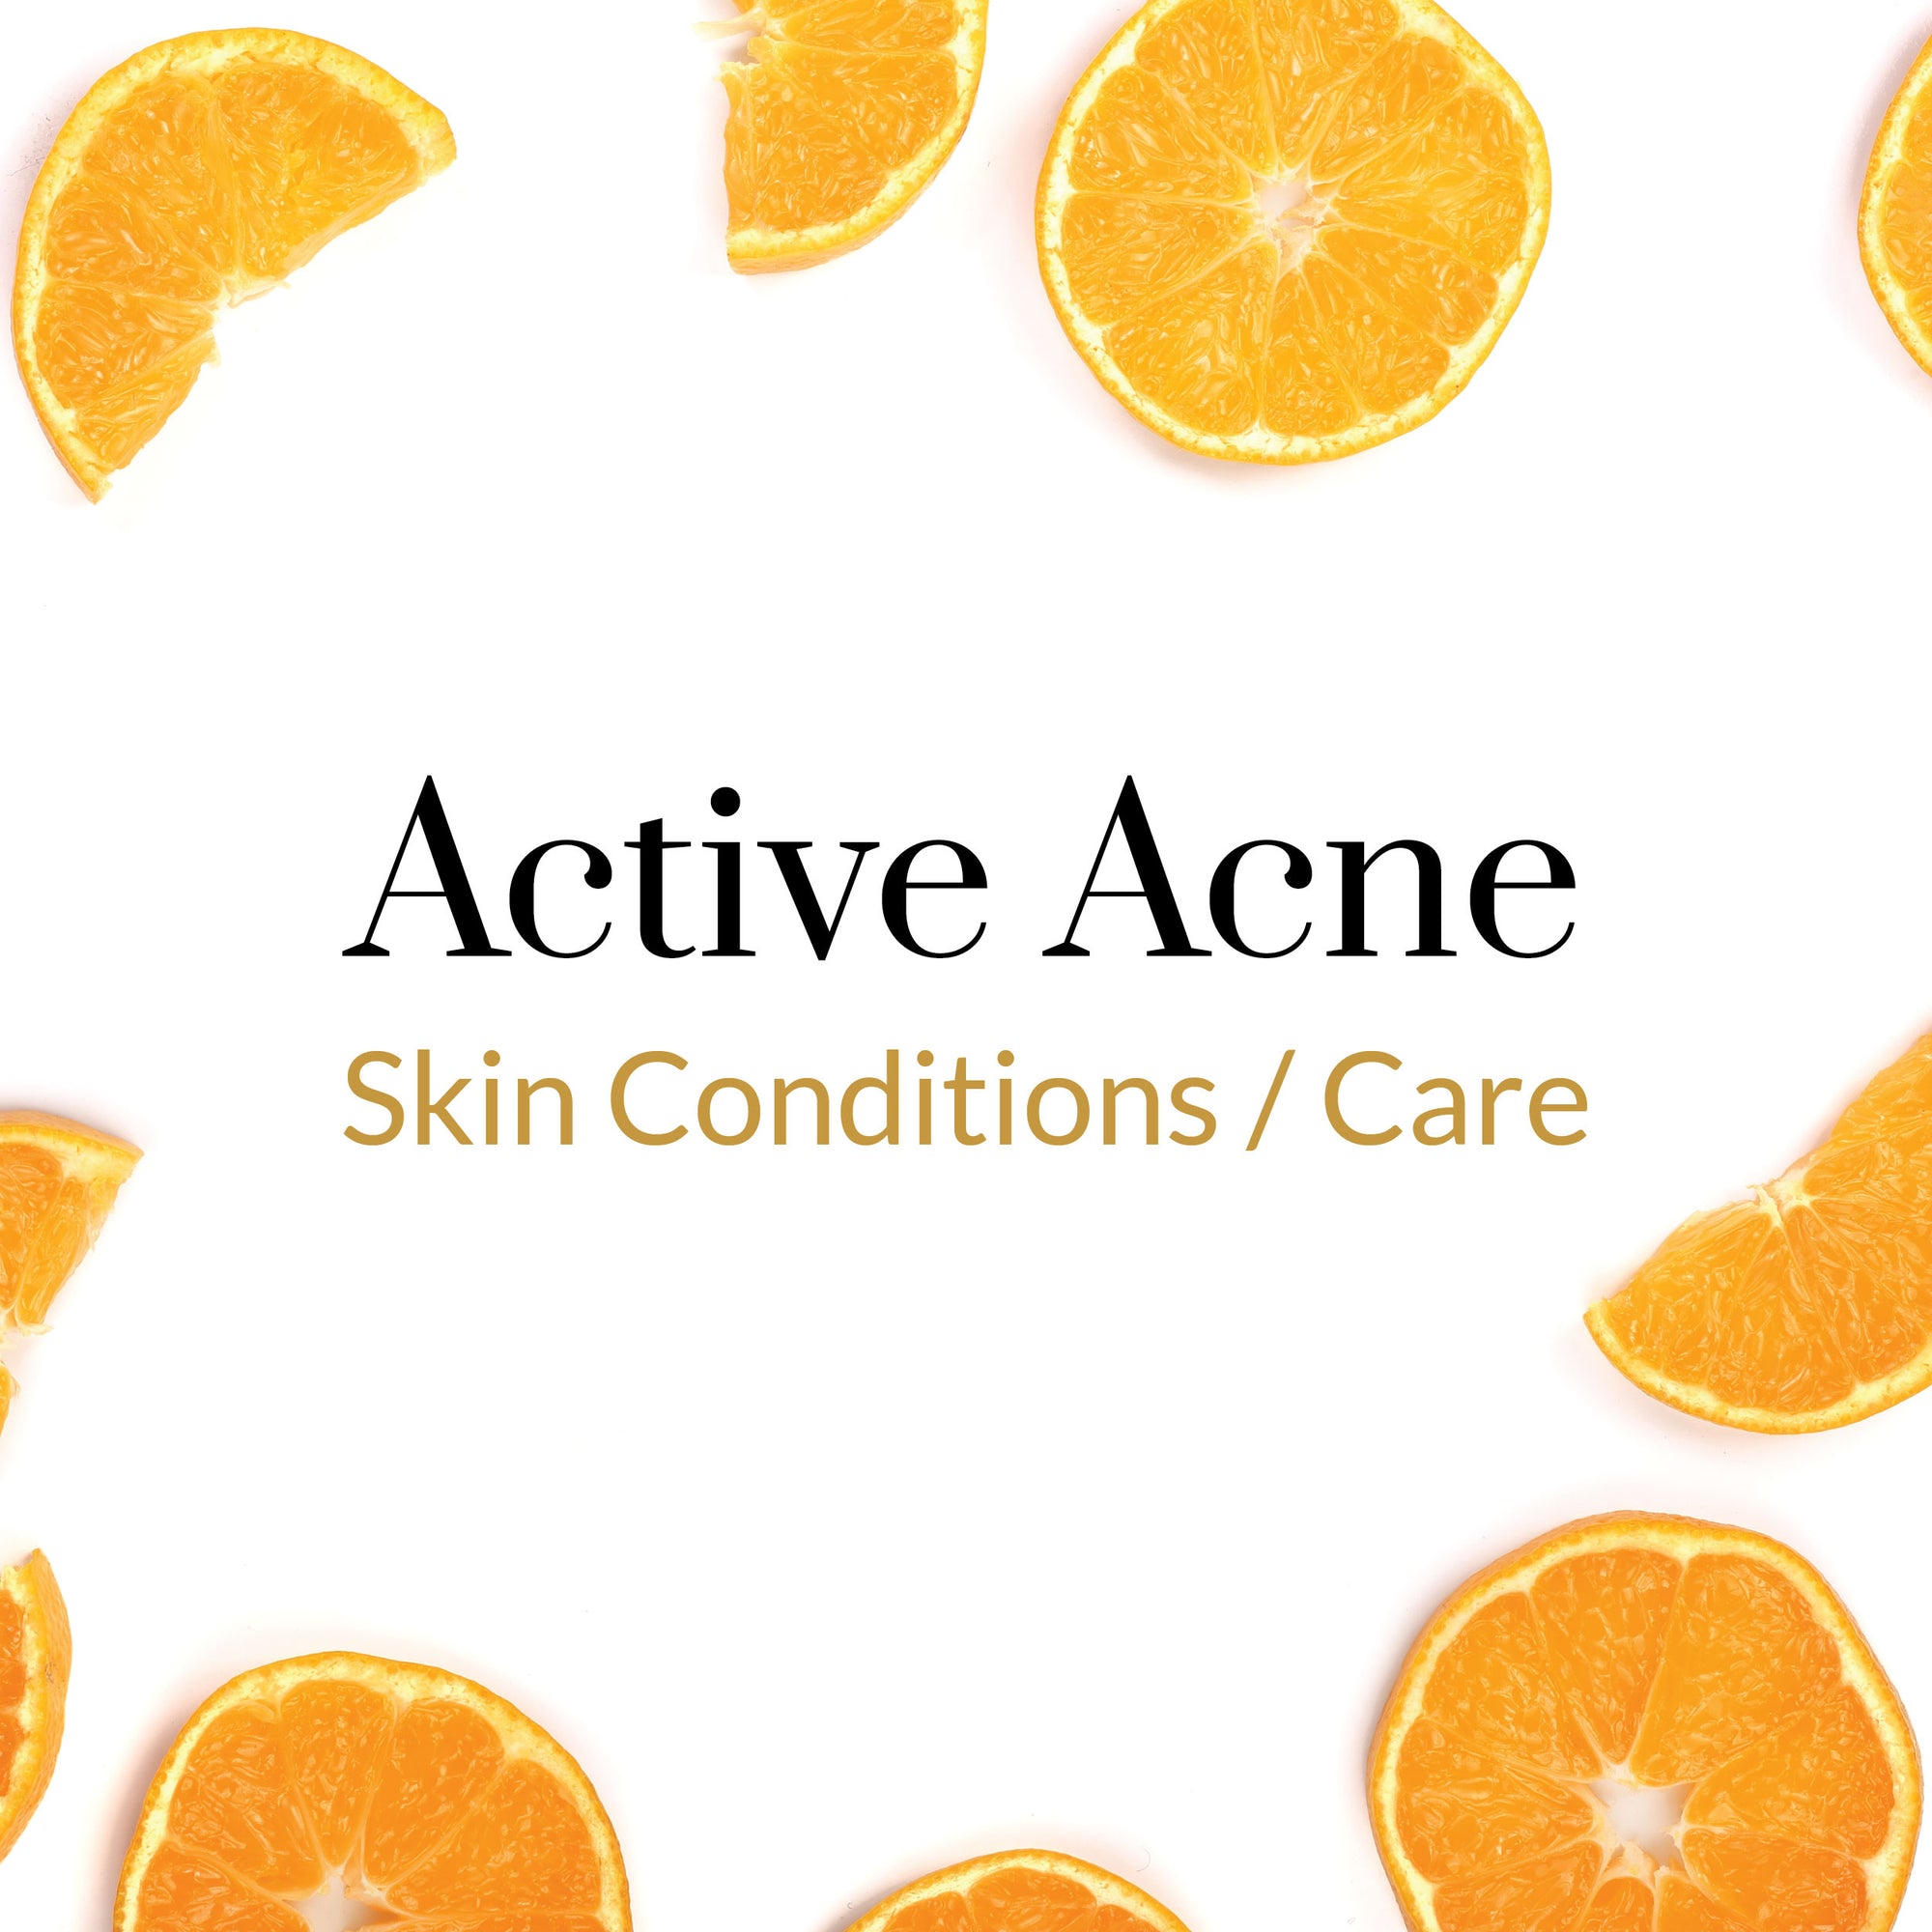 Skin Conditions/Care - Active Acne